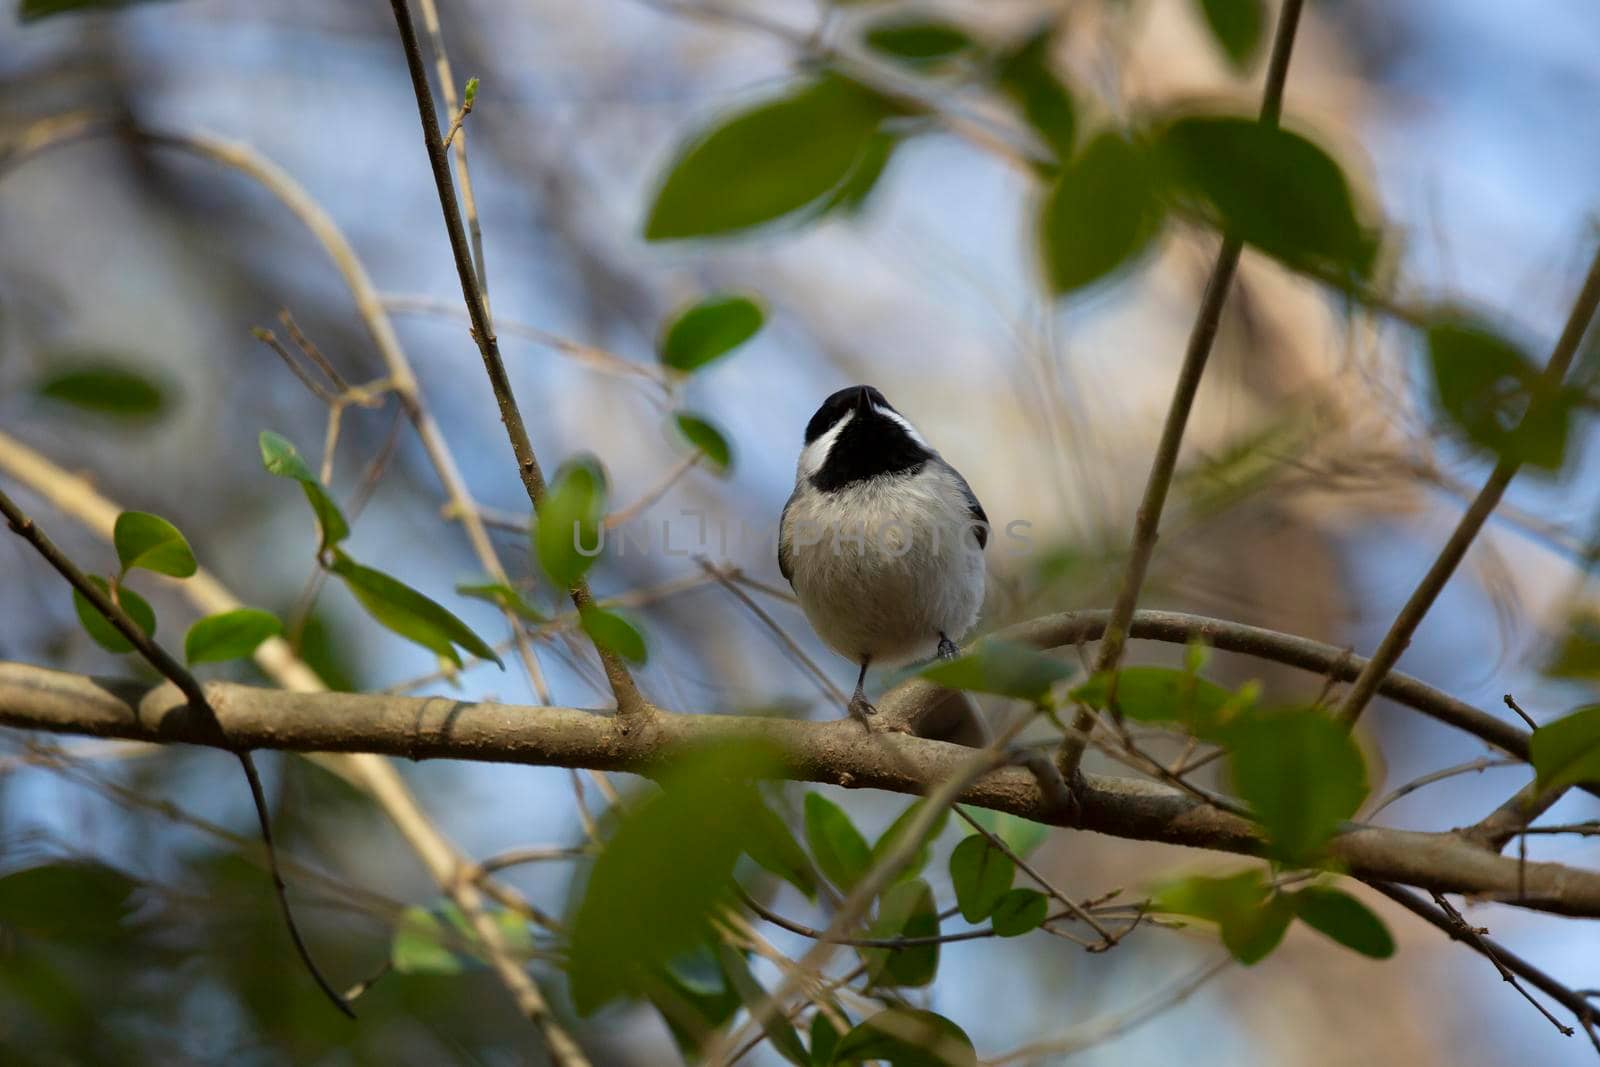 Curious black-capped chickadee (Poecile atricapillus) looking around from its perch on a bush branch